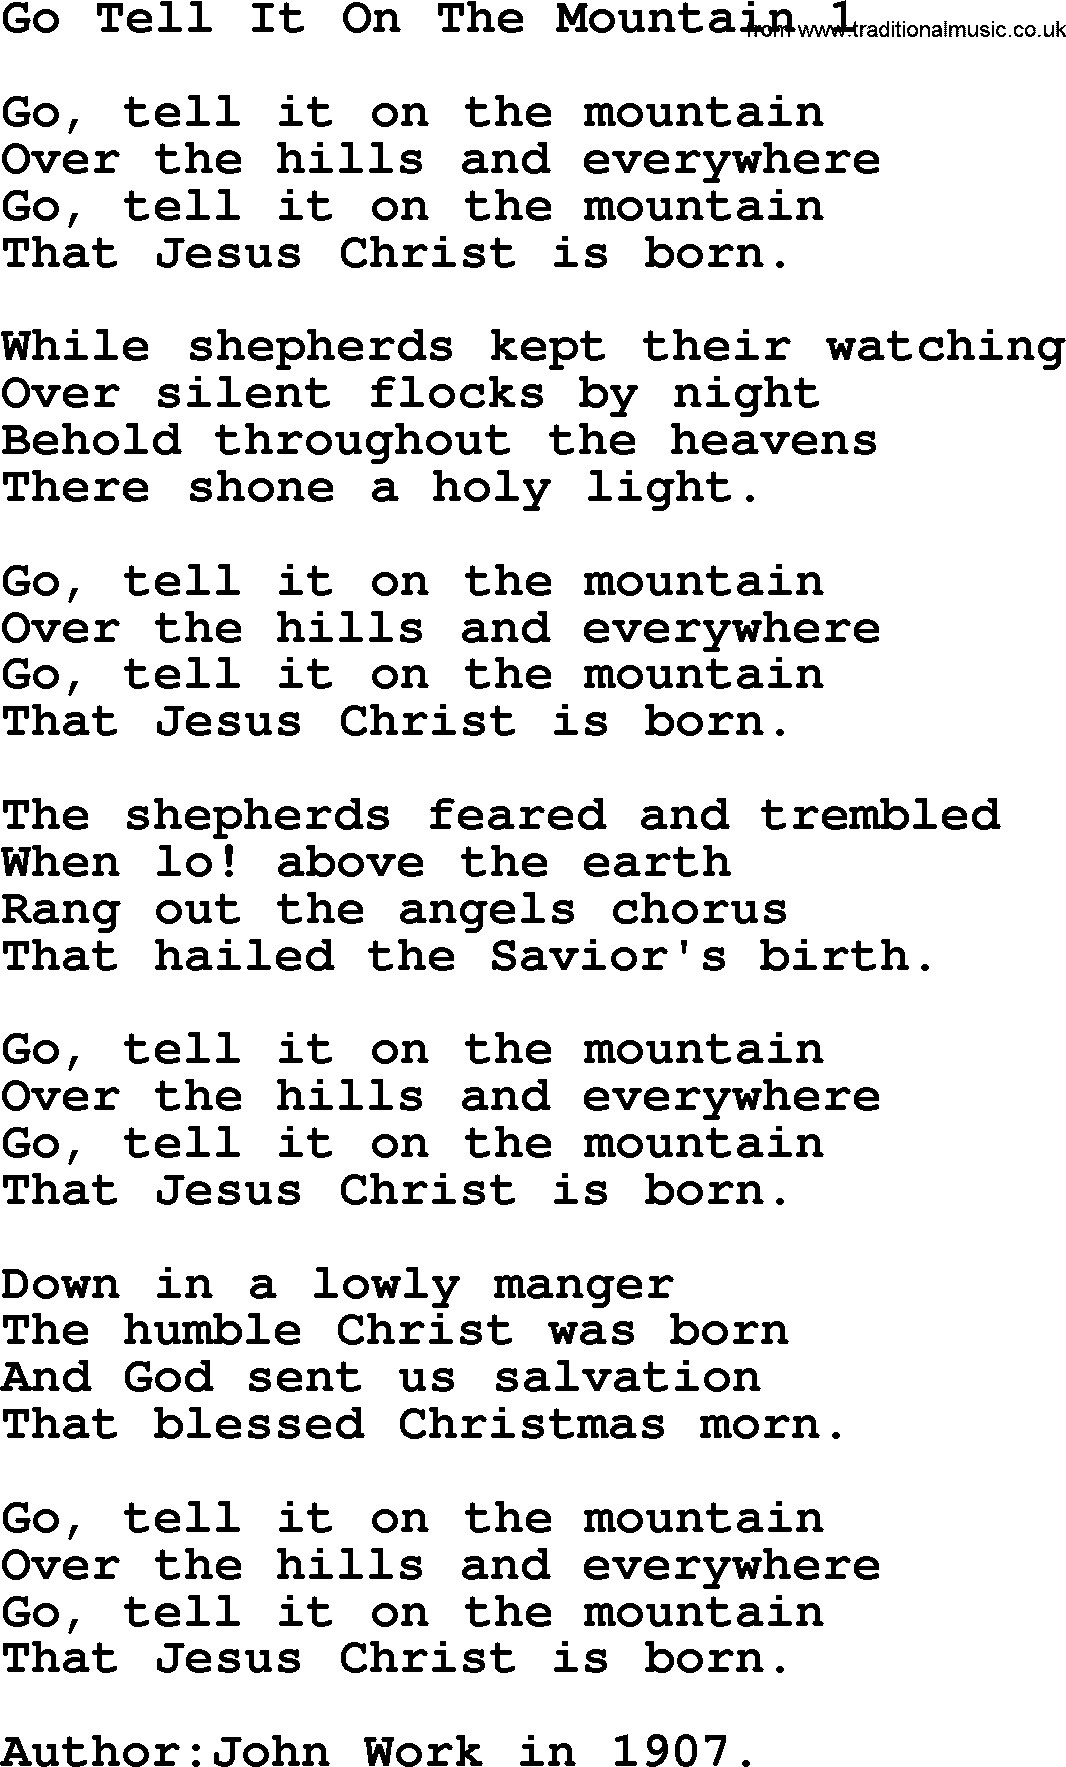 Christmas Powerpoints, Song: Go Tell It On The Mountain 1 - Lyrics, PPT(for church projection ...